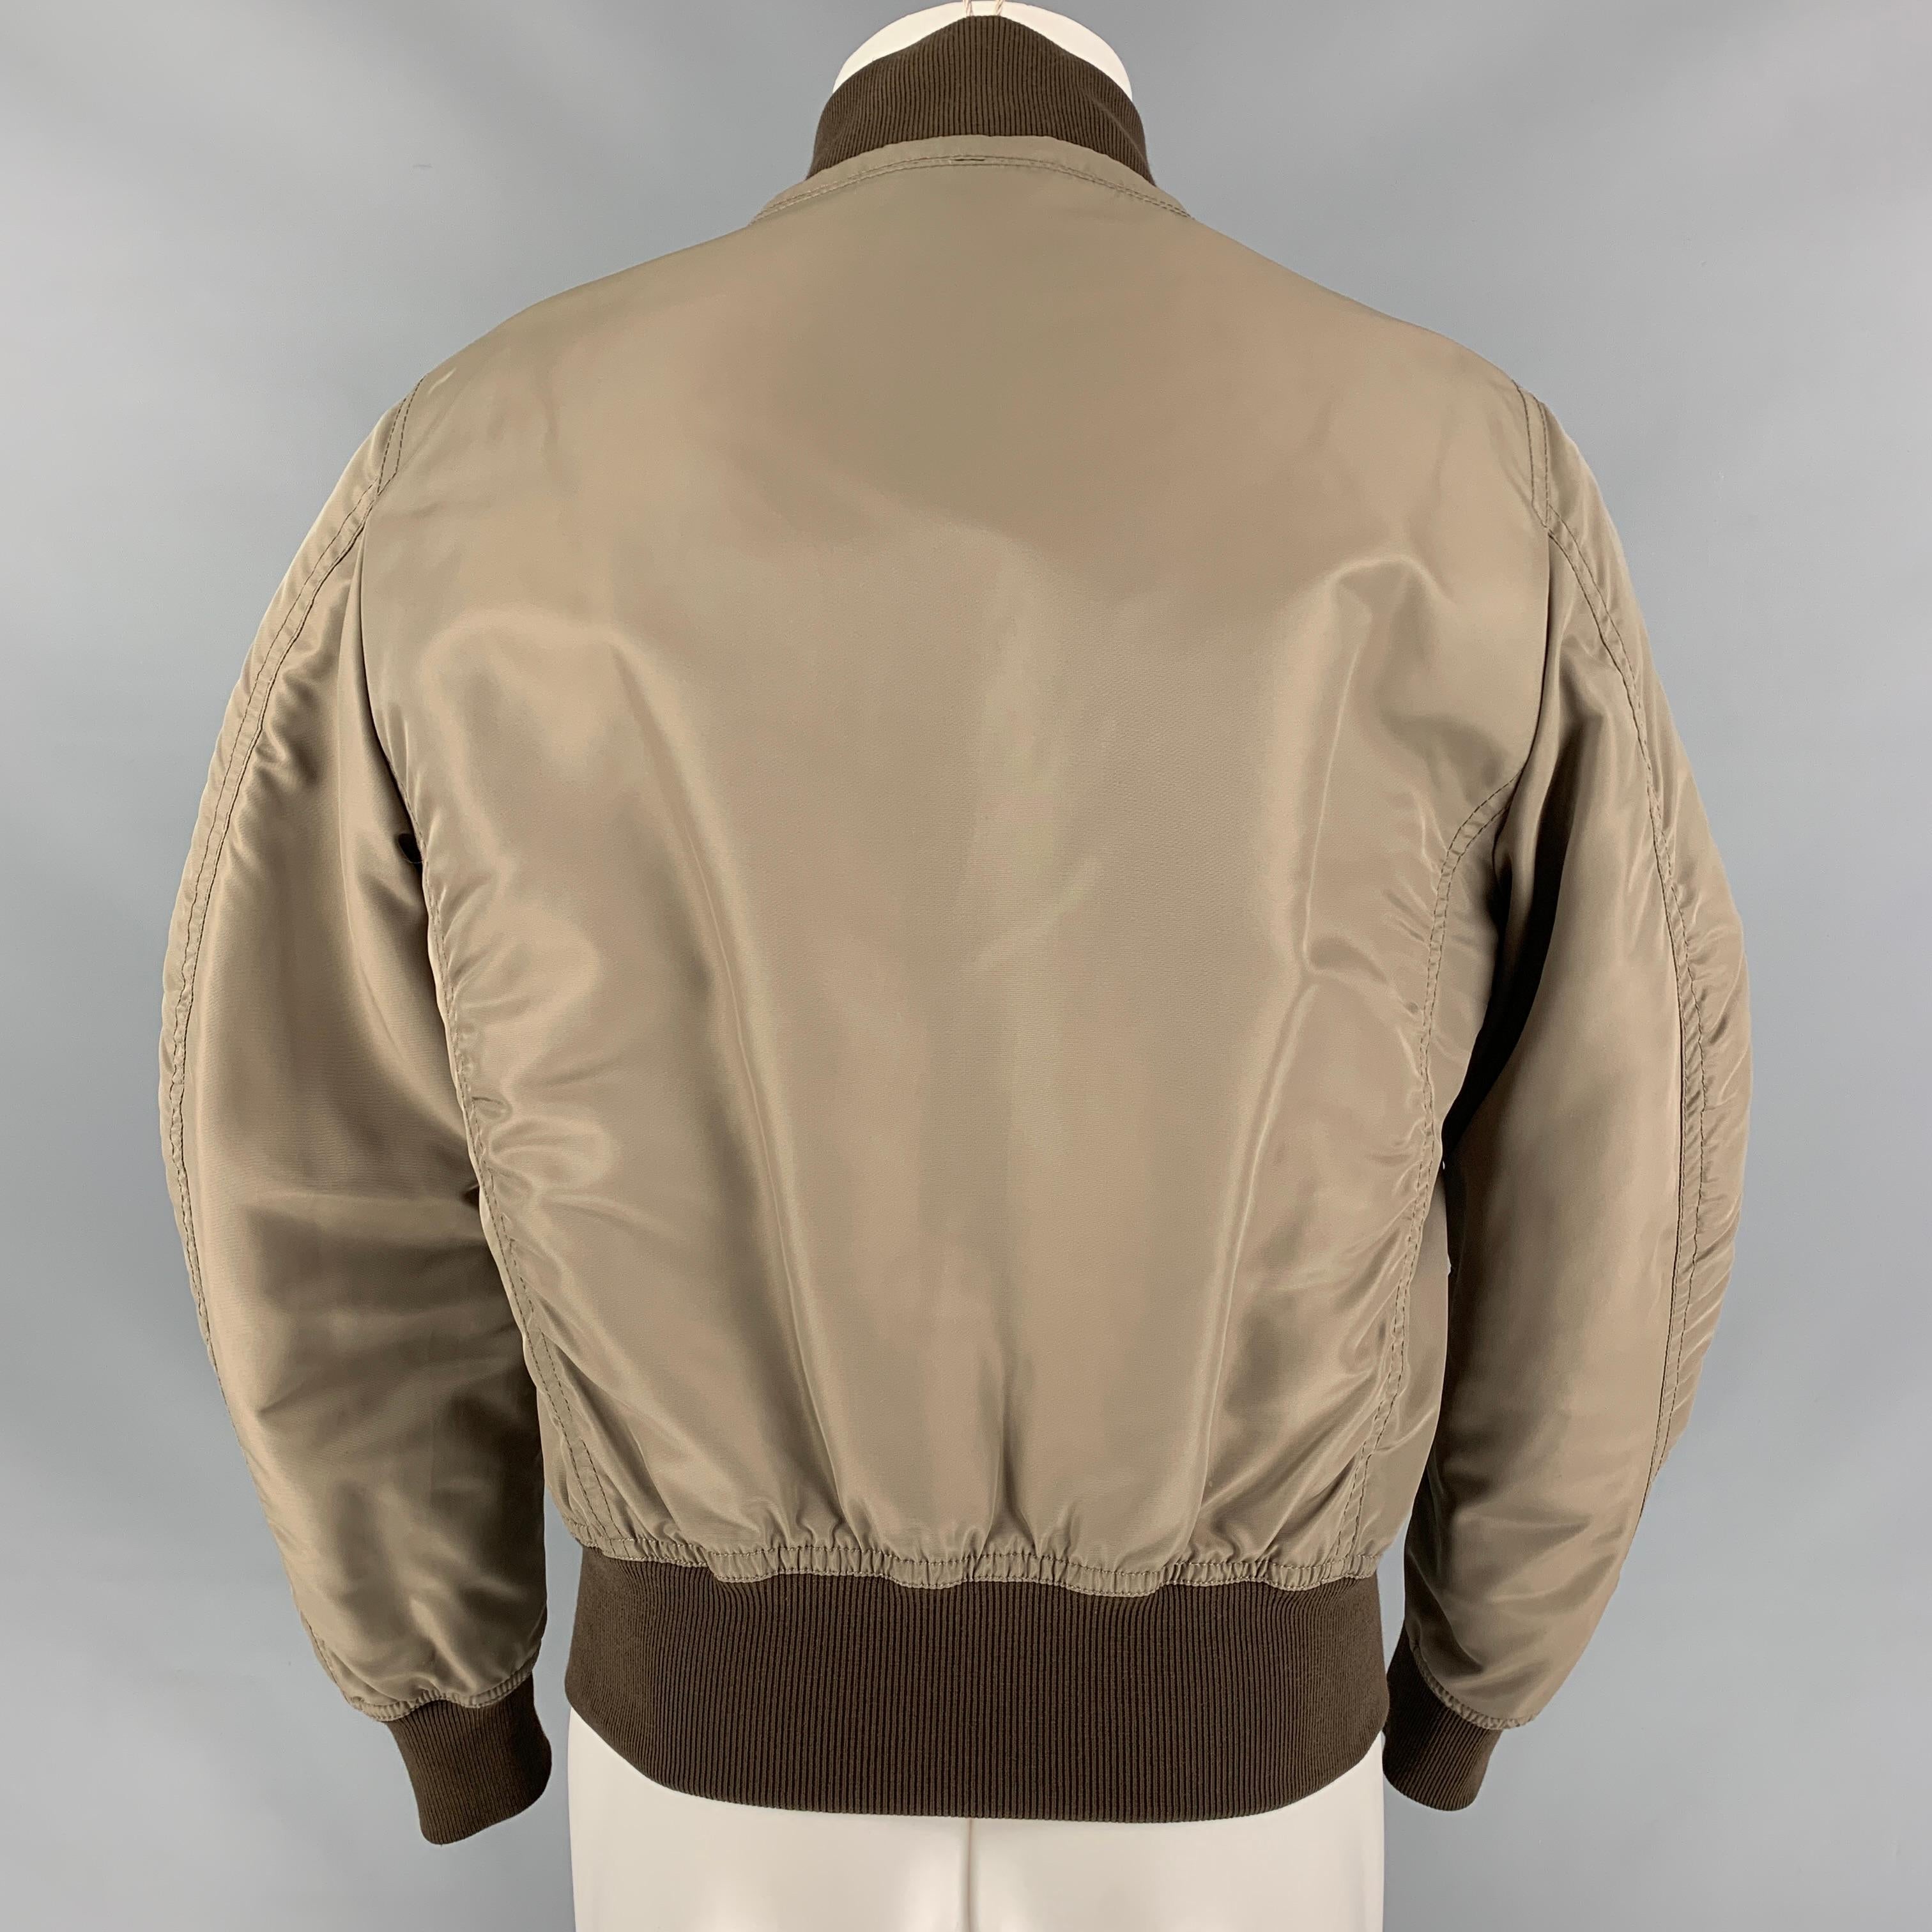 burberry bomber jacket brown